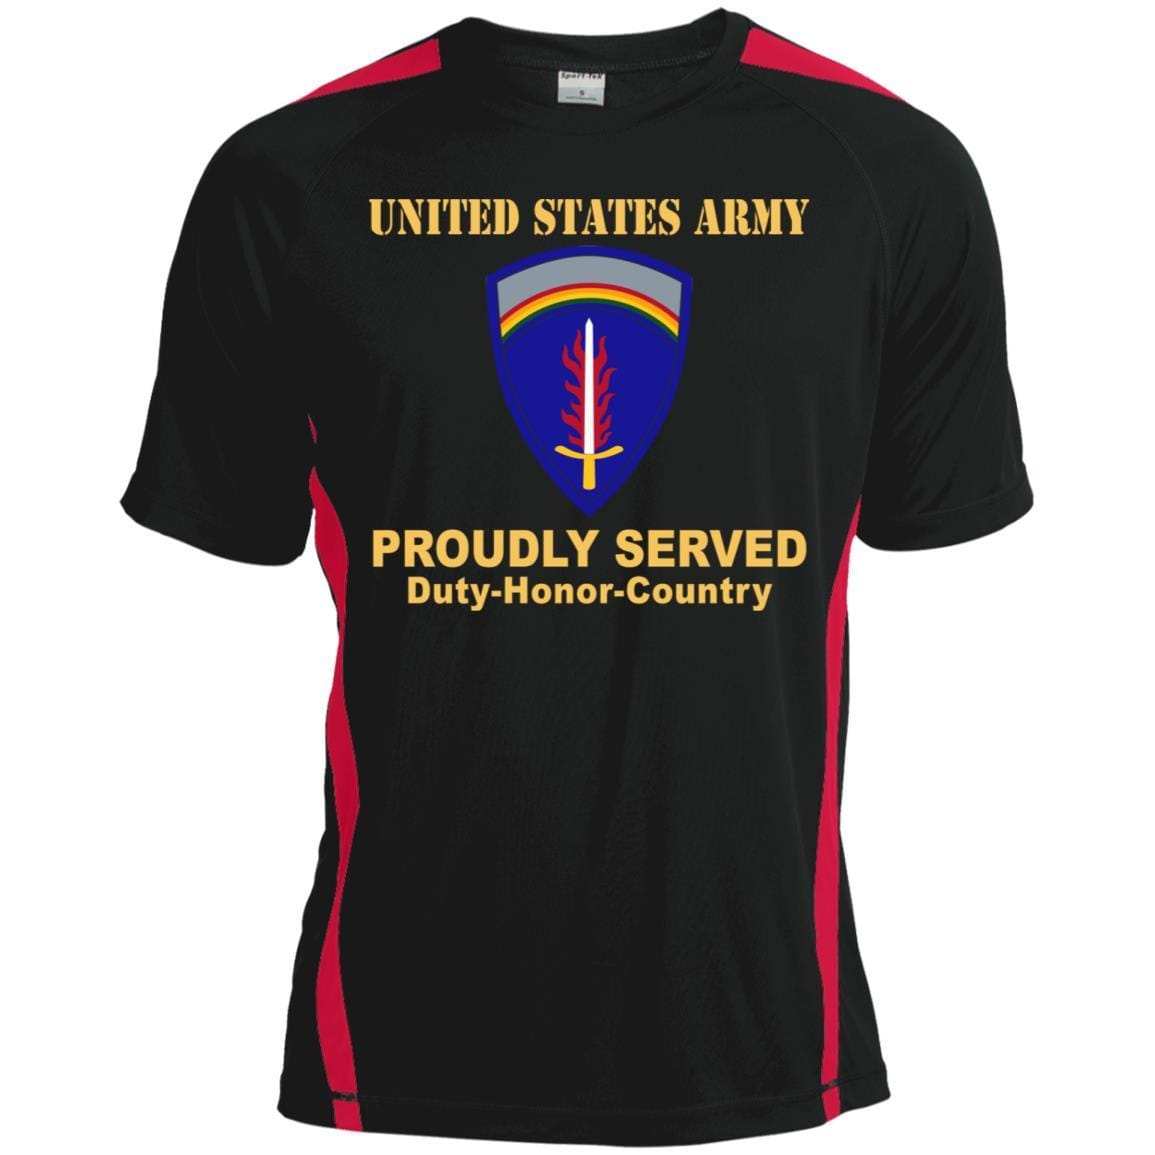 UNITED STATES ARMY EUROPE- Proudly Served T-Shirt On Front For Men-TShirt-Army-Veterans Nation